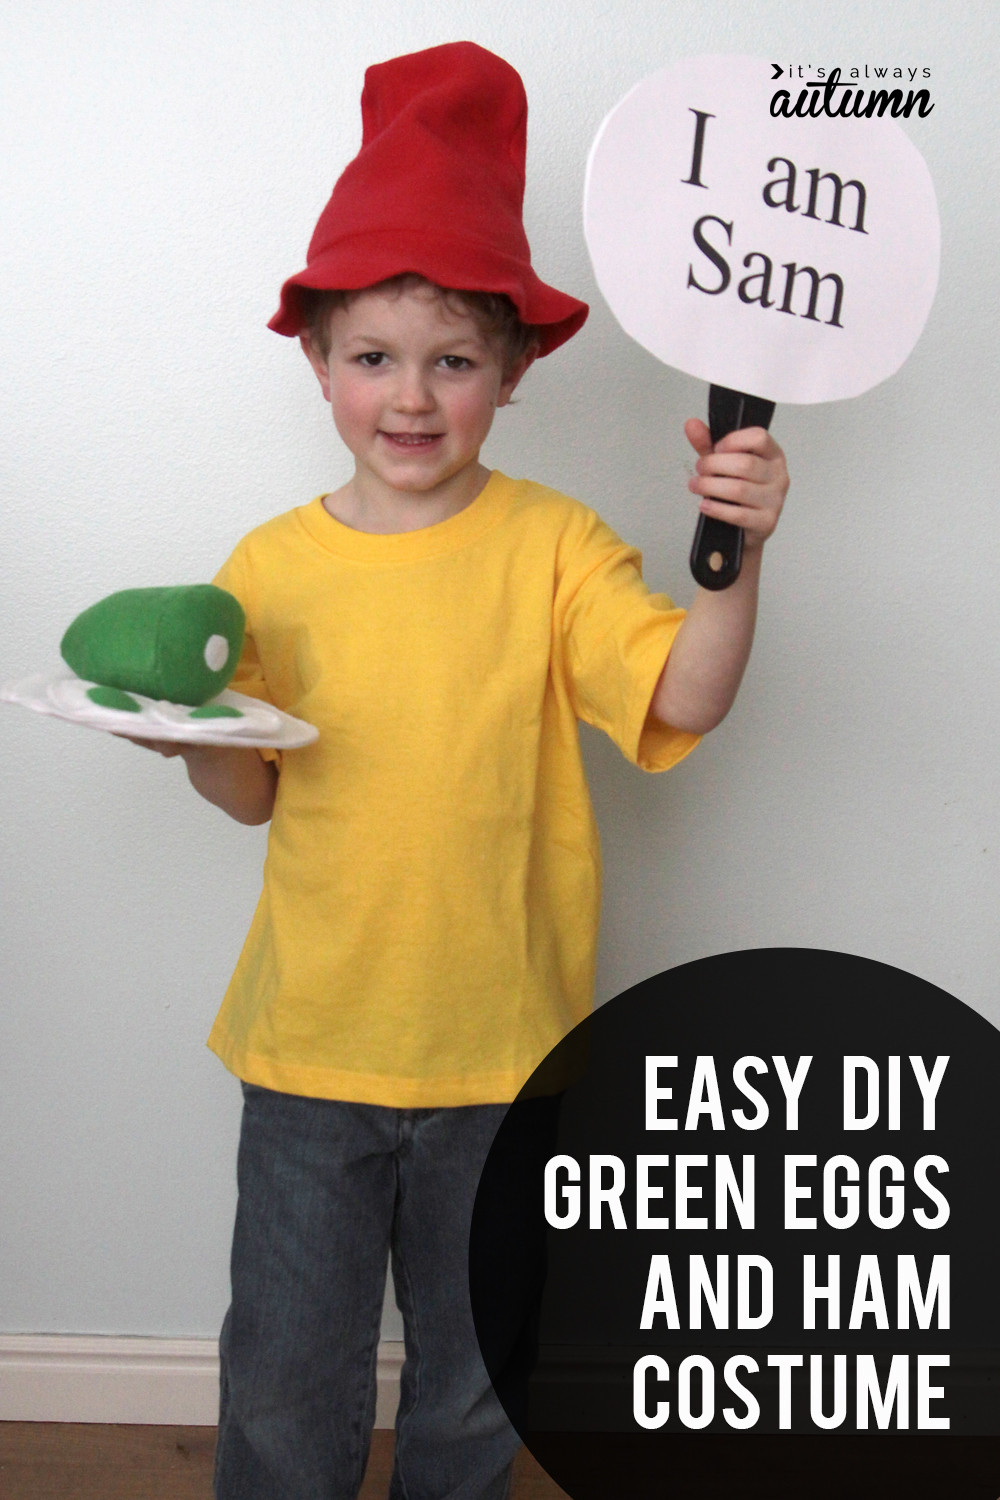 DIY Dr Seuss Costumes
 Easy DIY Green Eggs and Ham costumes for Dr Suess day